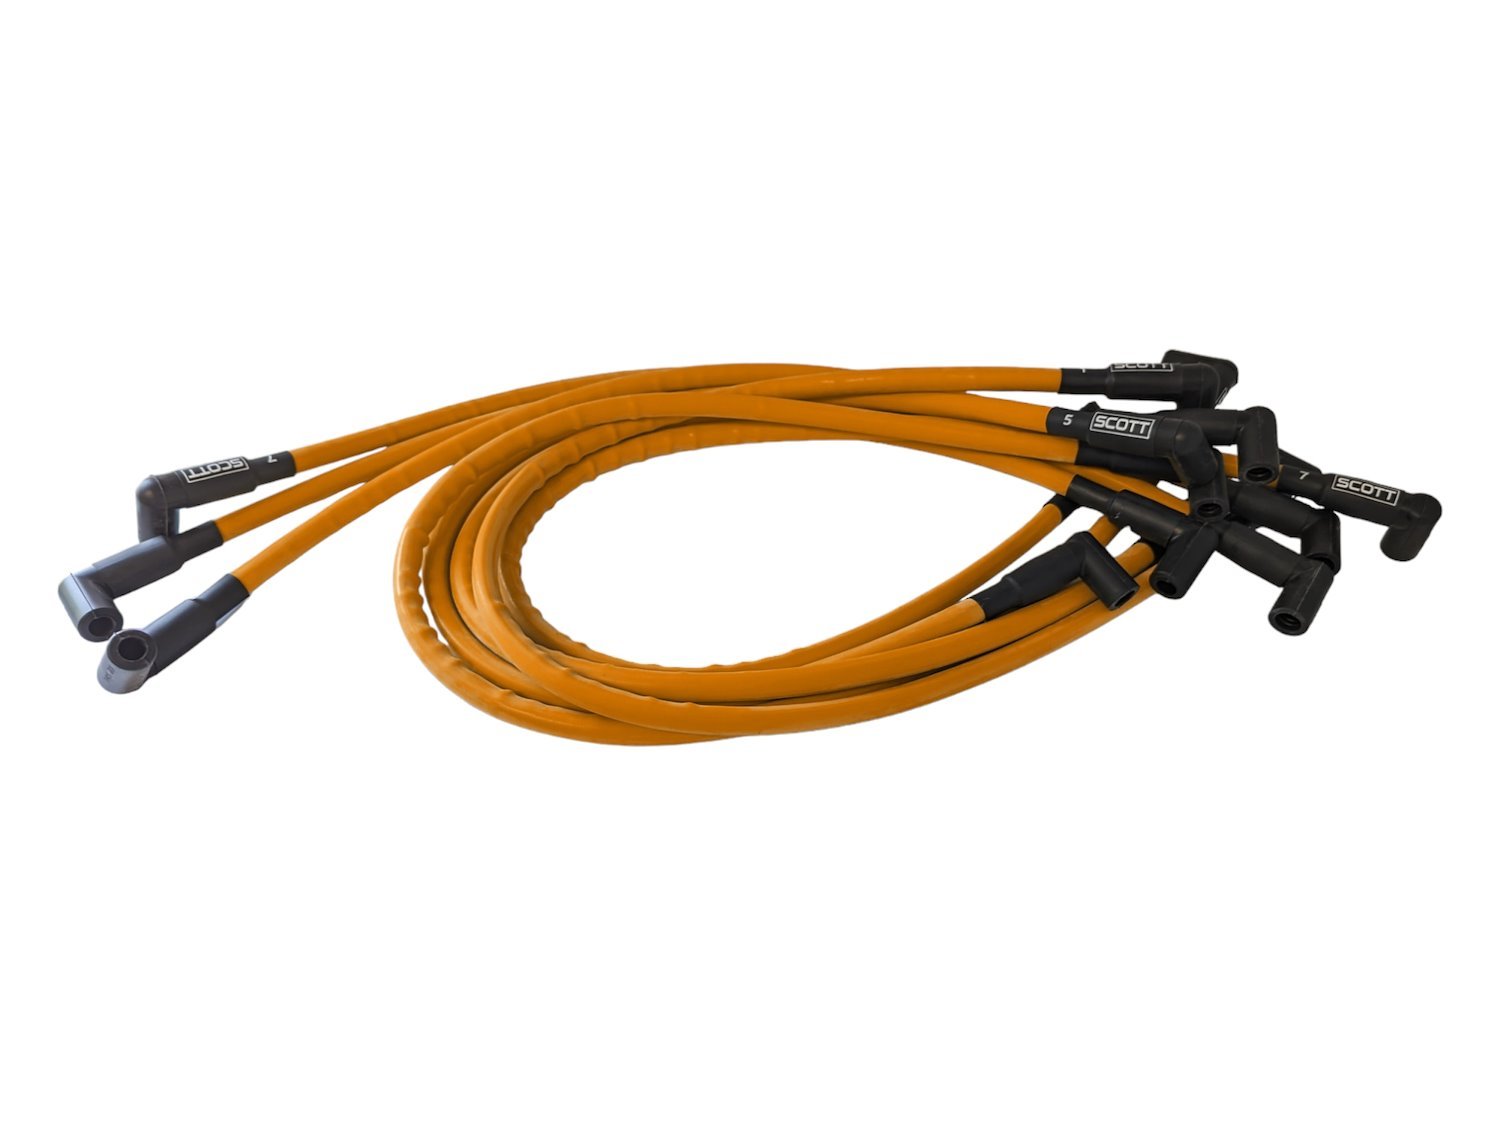 SPW-CH-430-5 High-Performance Silicone-Sleeved Spark Plug Wire Set for Big Block Ford, Under Header [Orange]